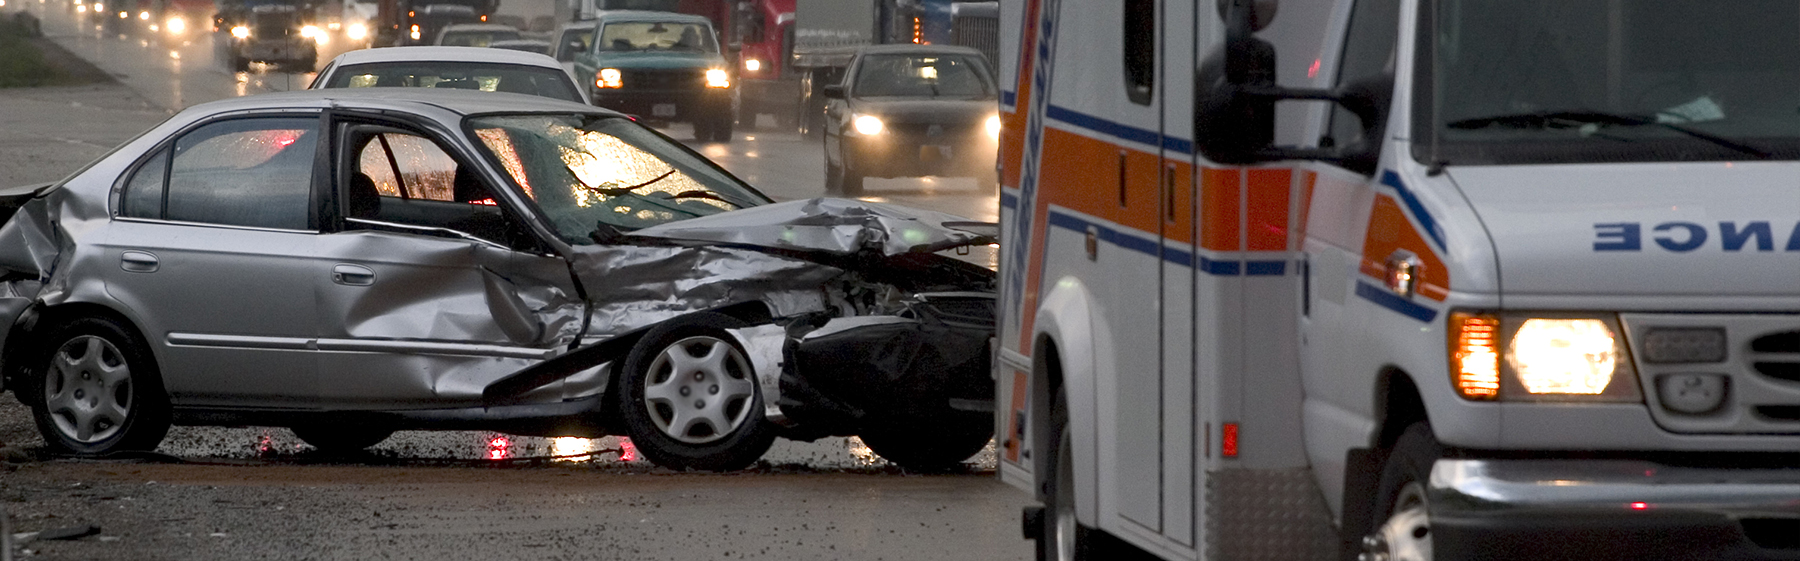 Causes Of Washington, D.C. Traffic Fatality Accidents